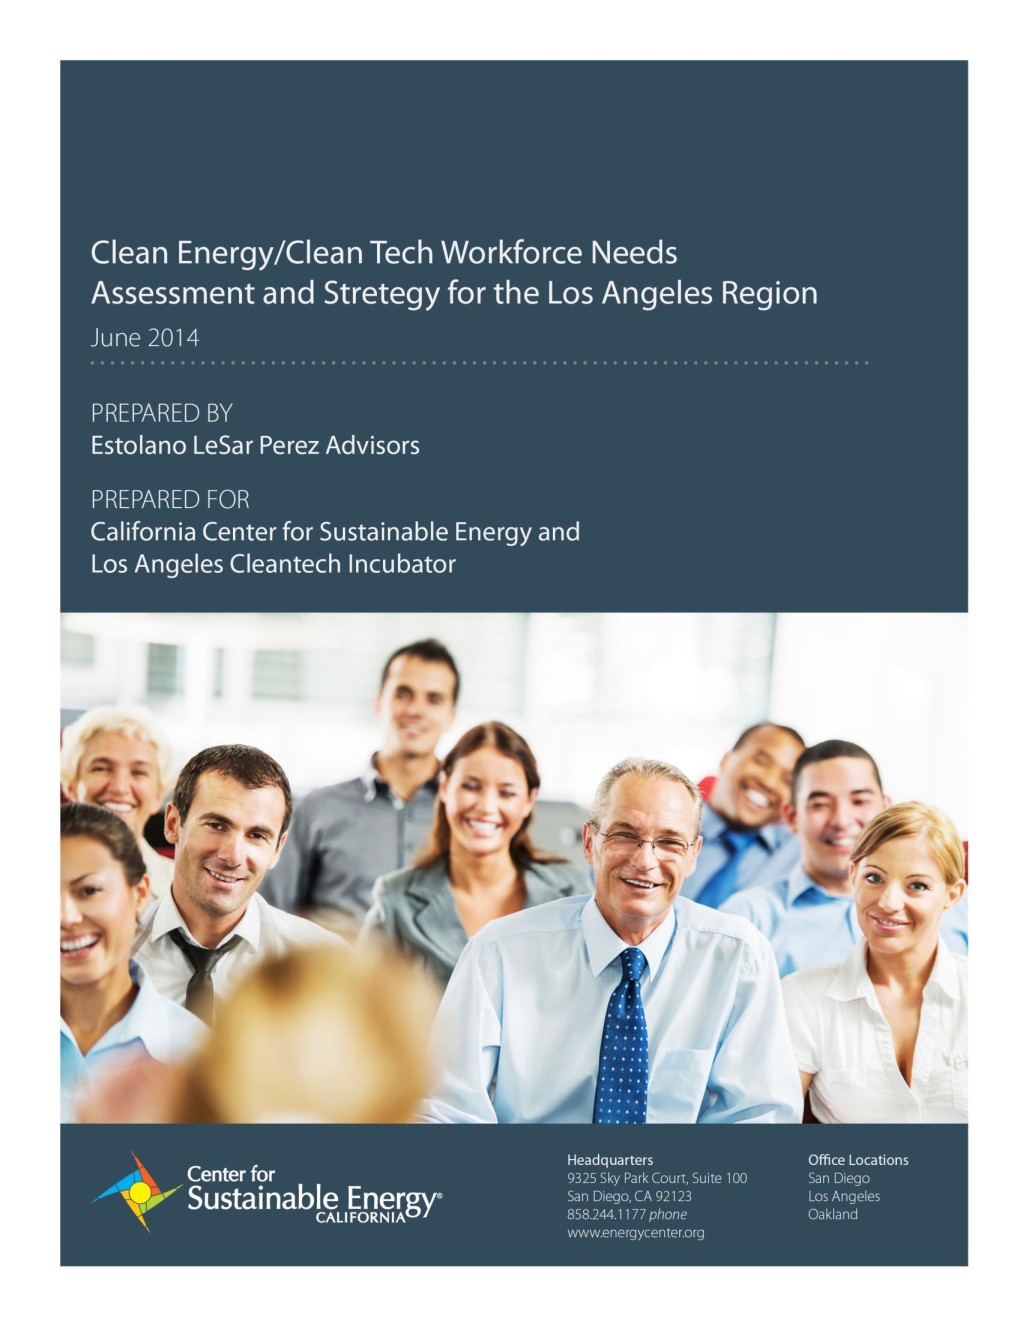 Clean Energy/Clean Tech Workforce Needs Assessment and Strategy For